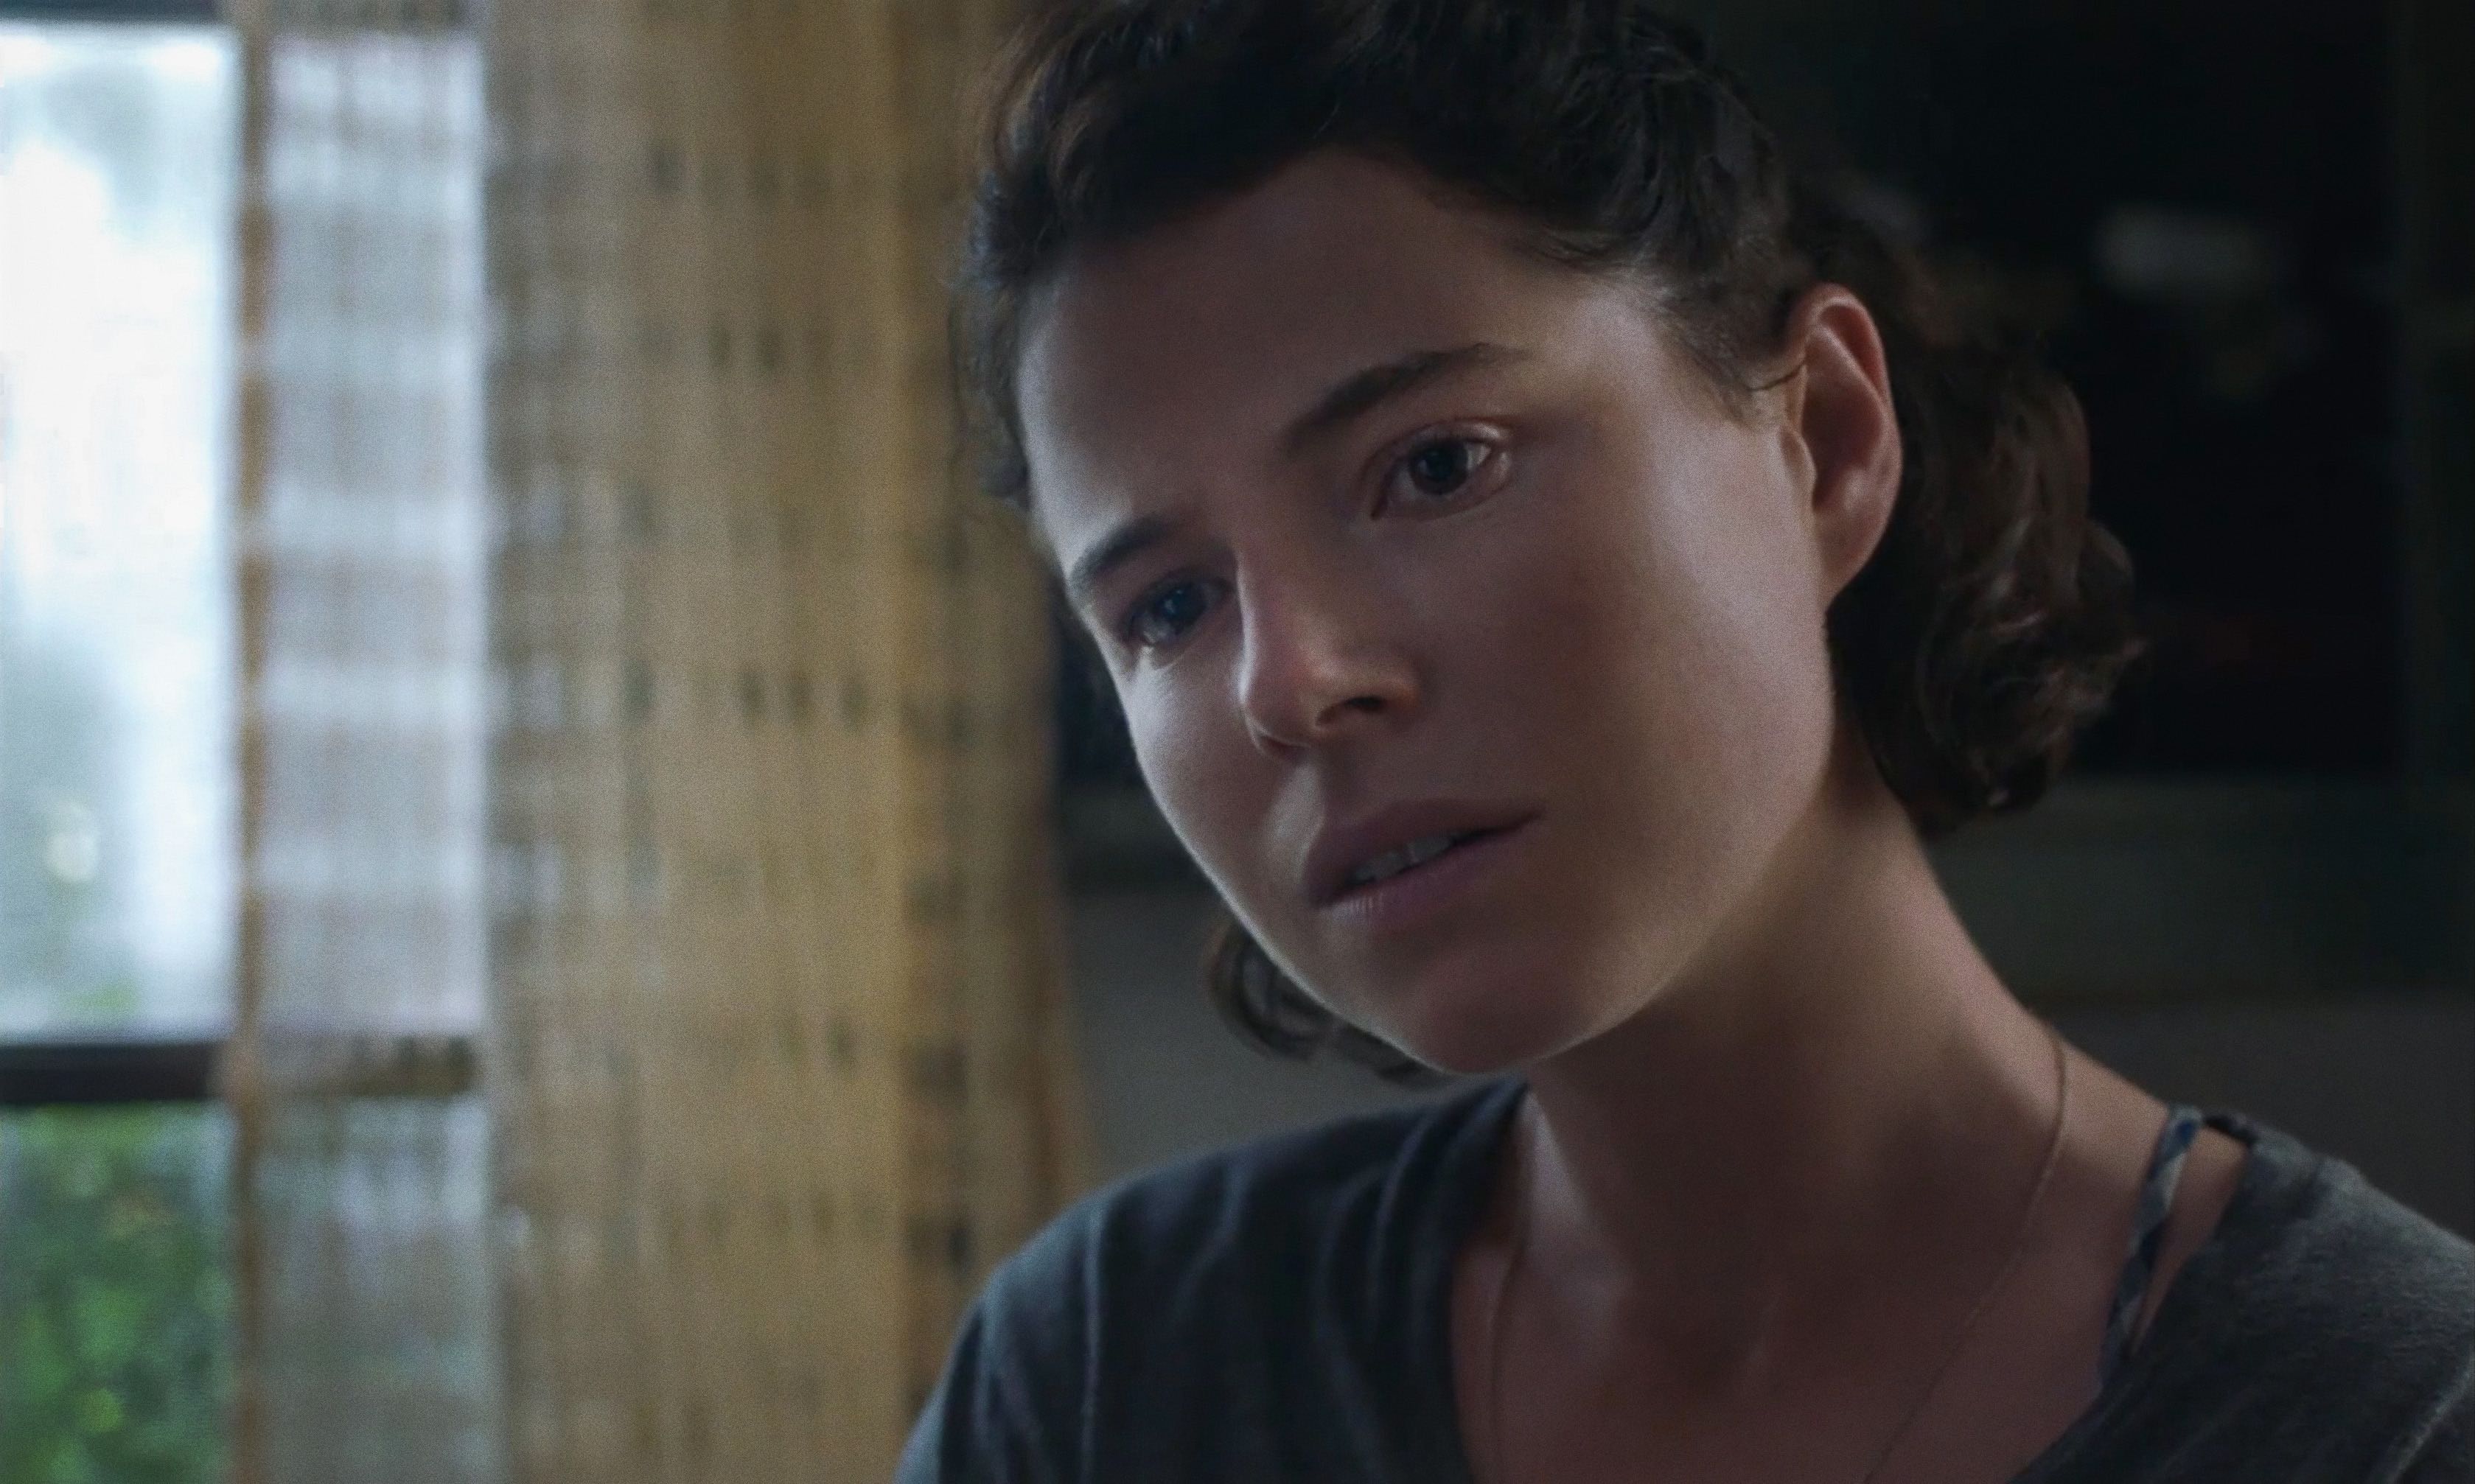 The Lost Daughter Cast - Jessie Buckley as Young Leda Caruso